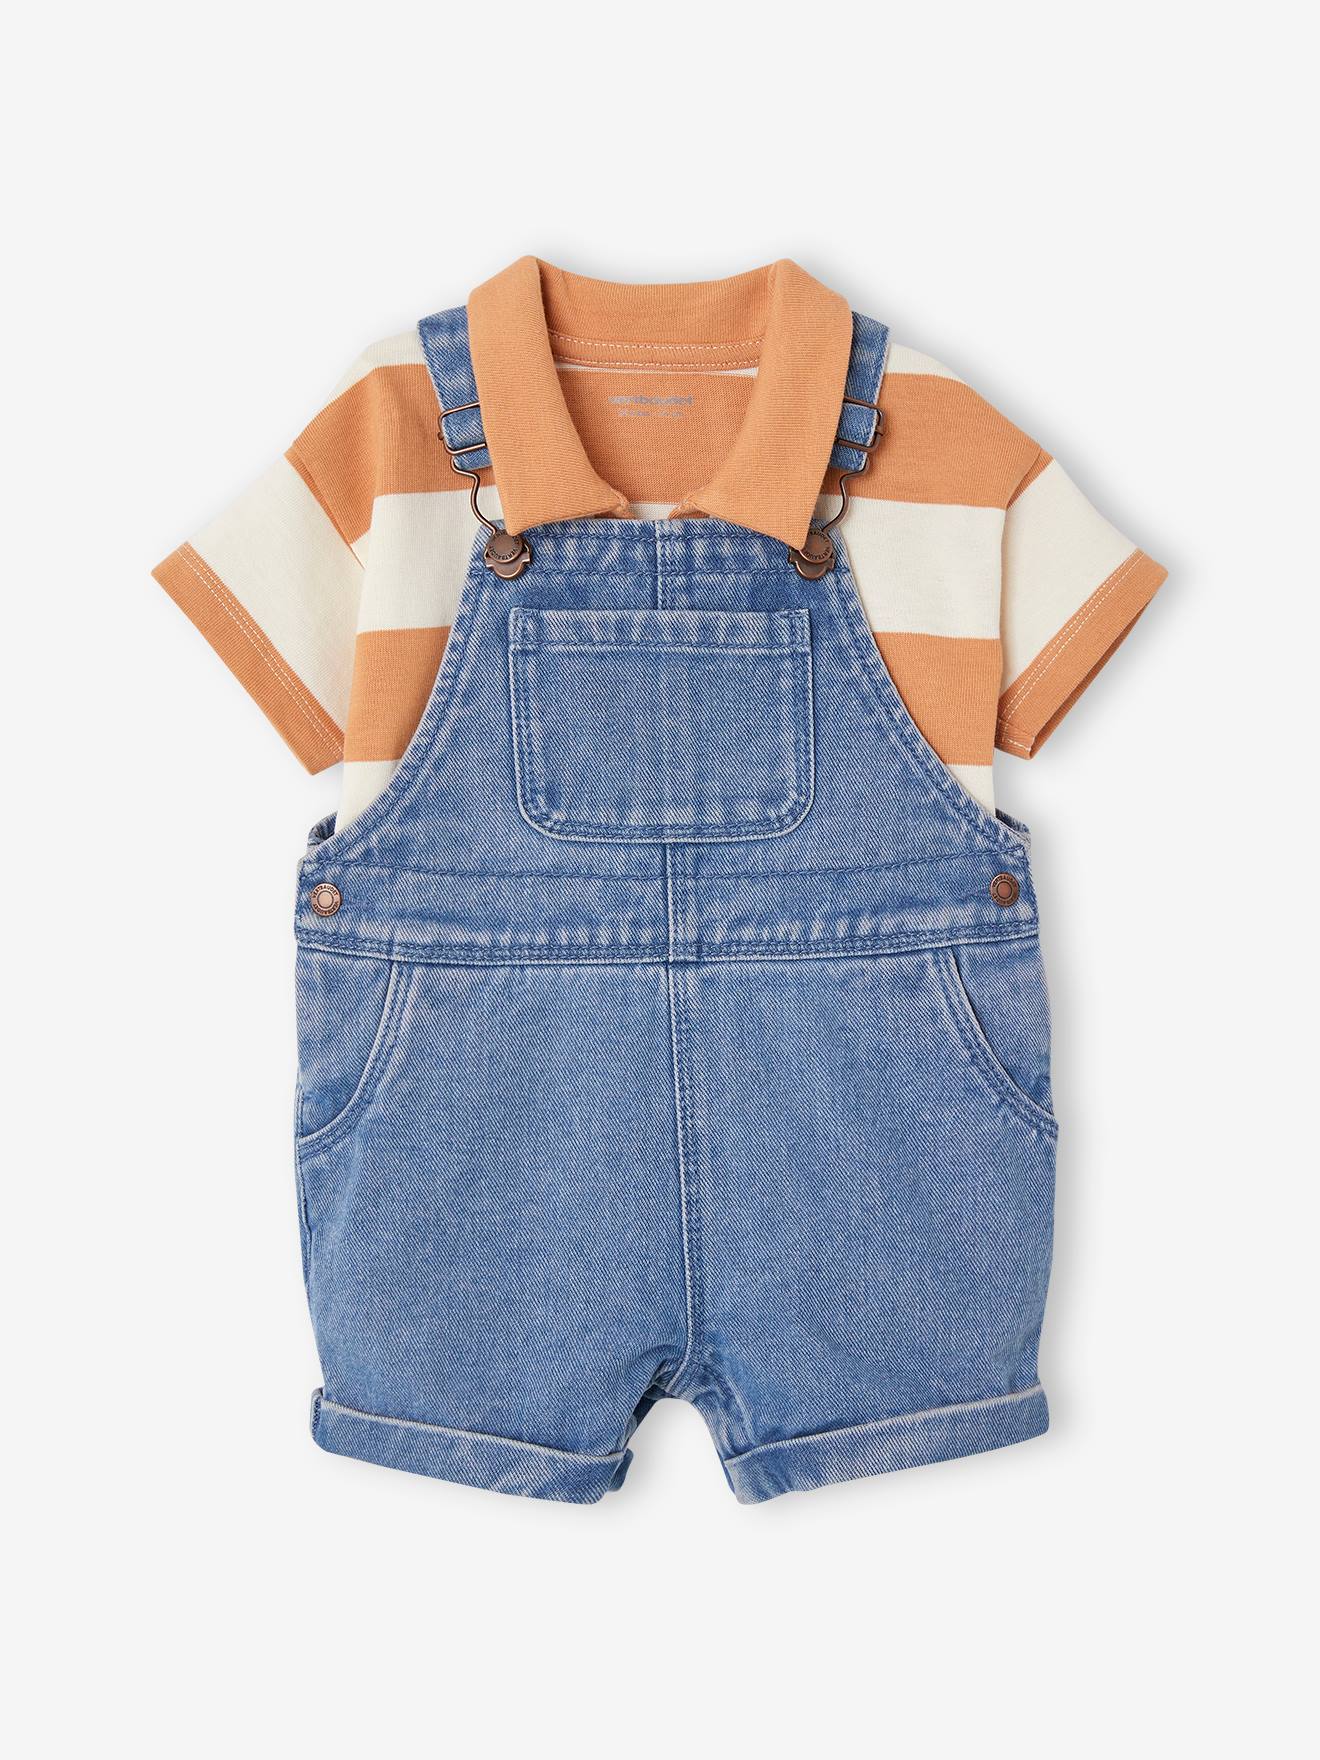 Denim Dungaree Shorts & Striped Polo Shirt Combo for Babies peach